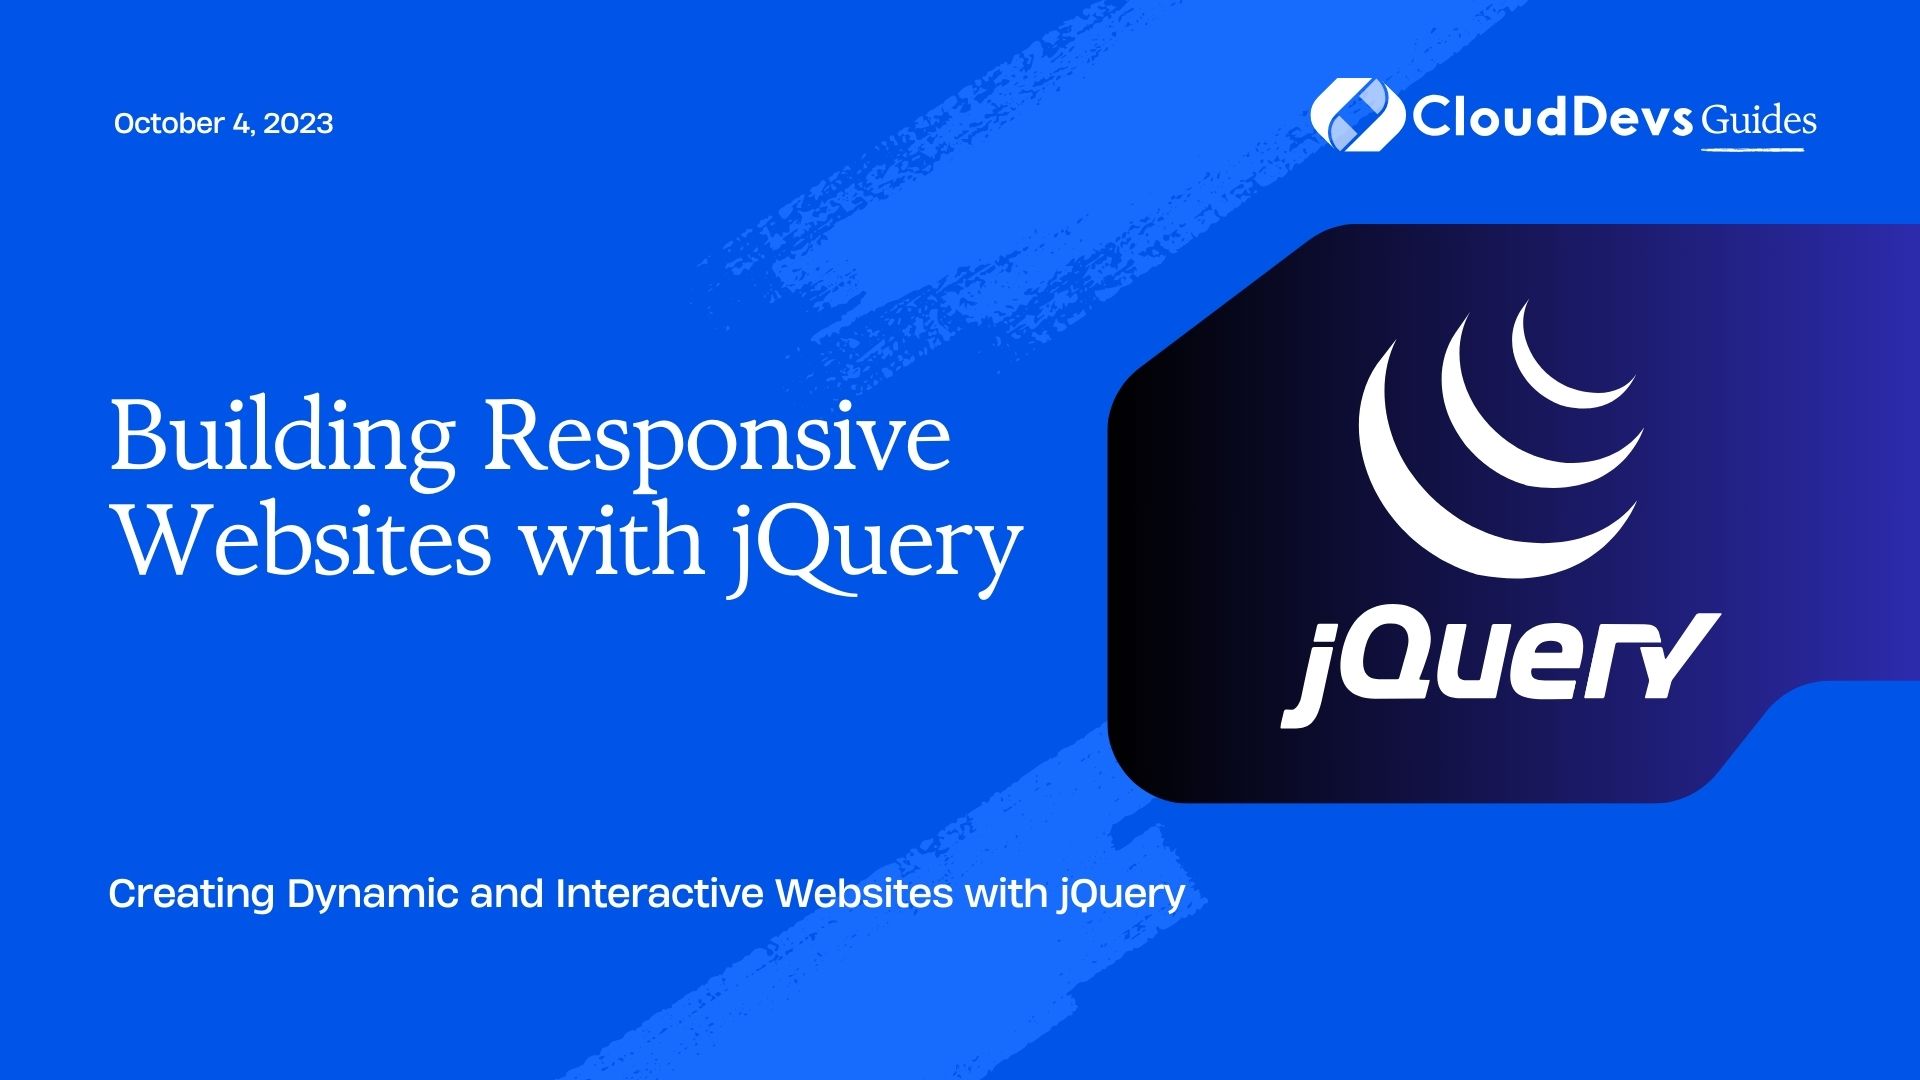 Building Responsive Websites with jQuery